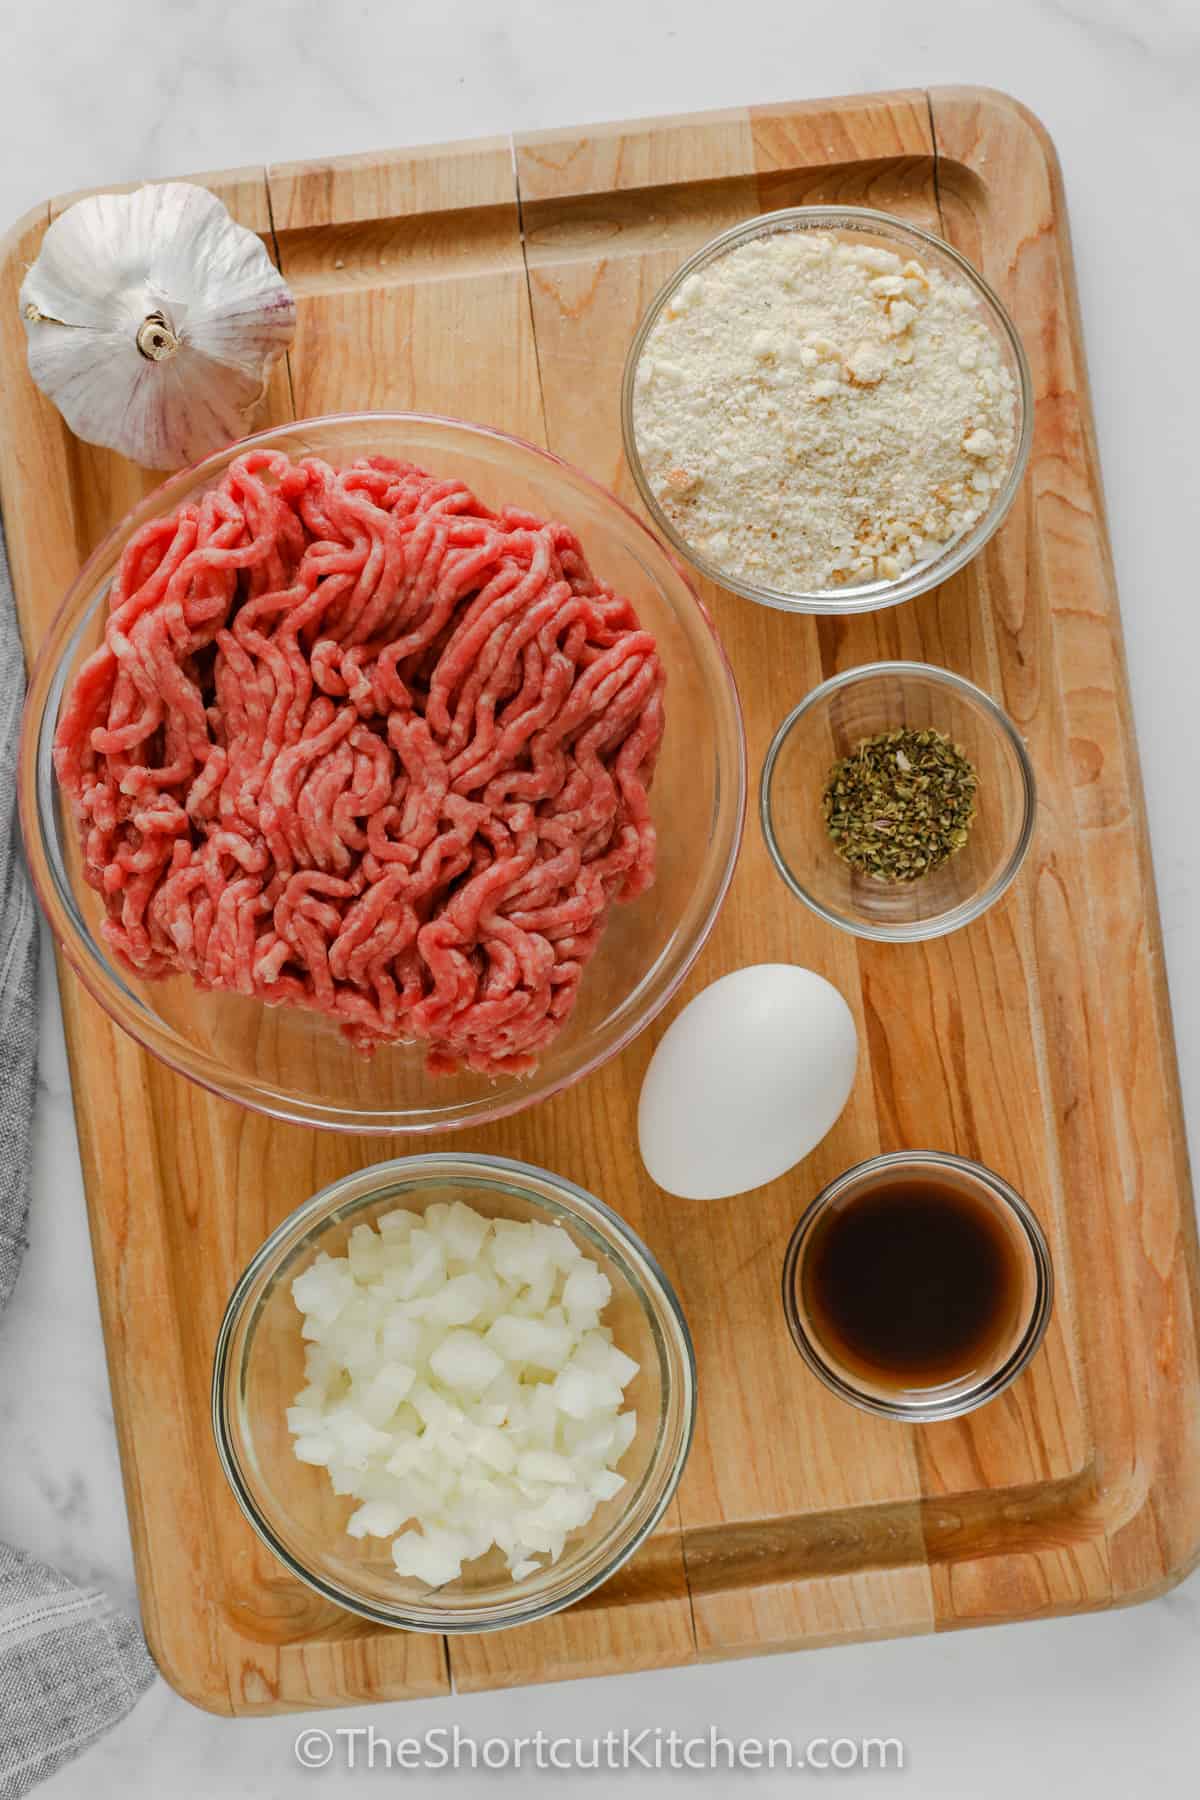 ingredients to make Simple Meatball Recipe